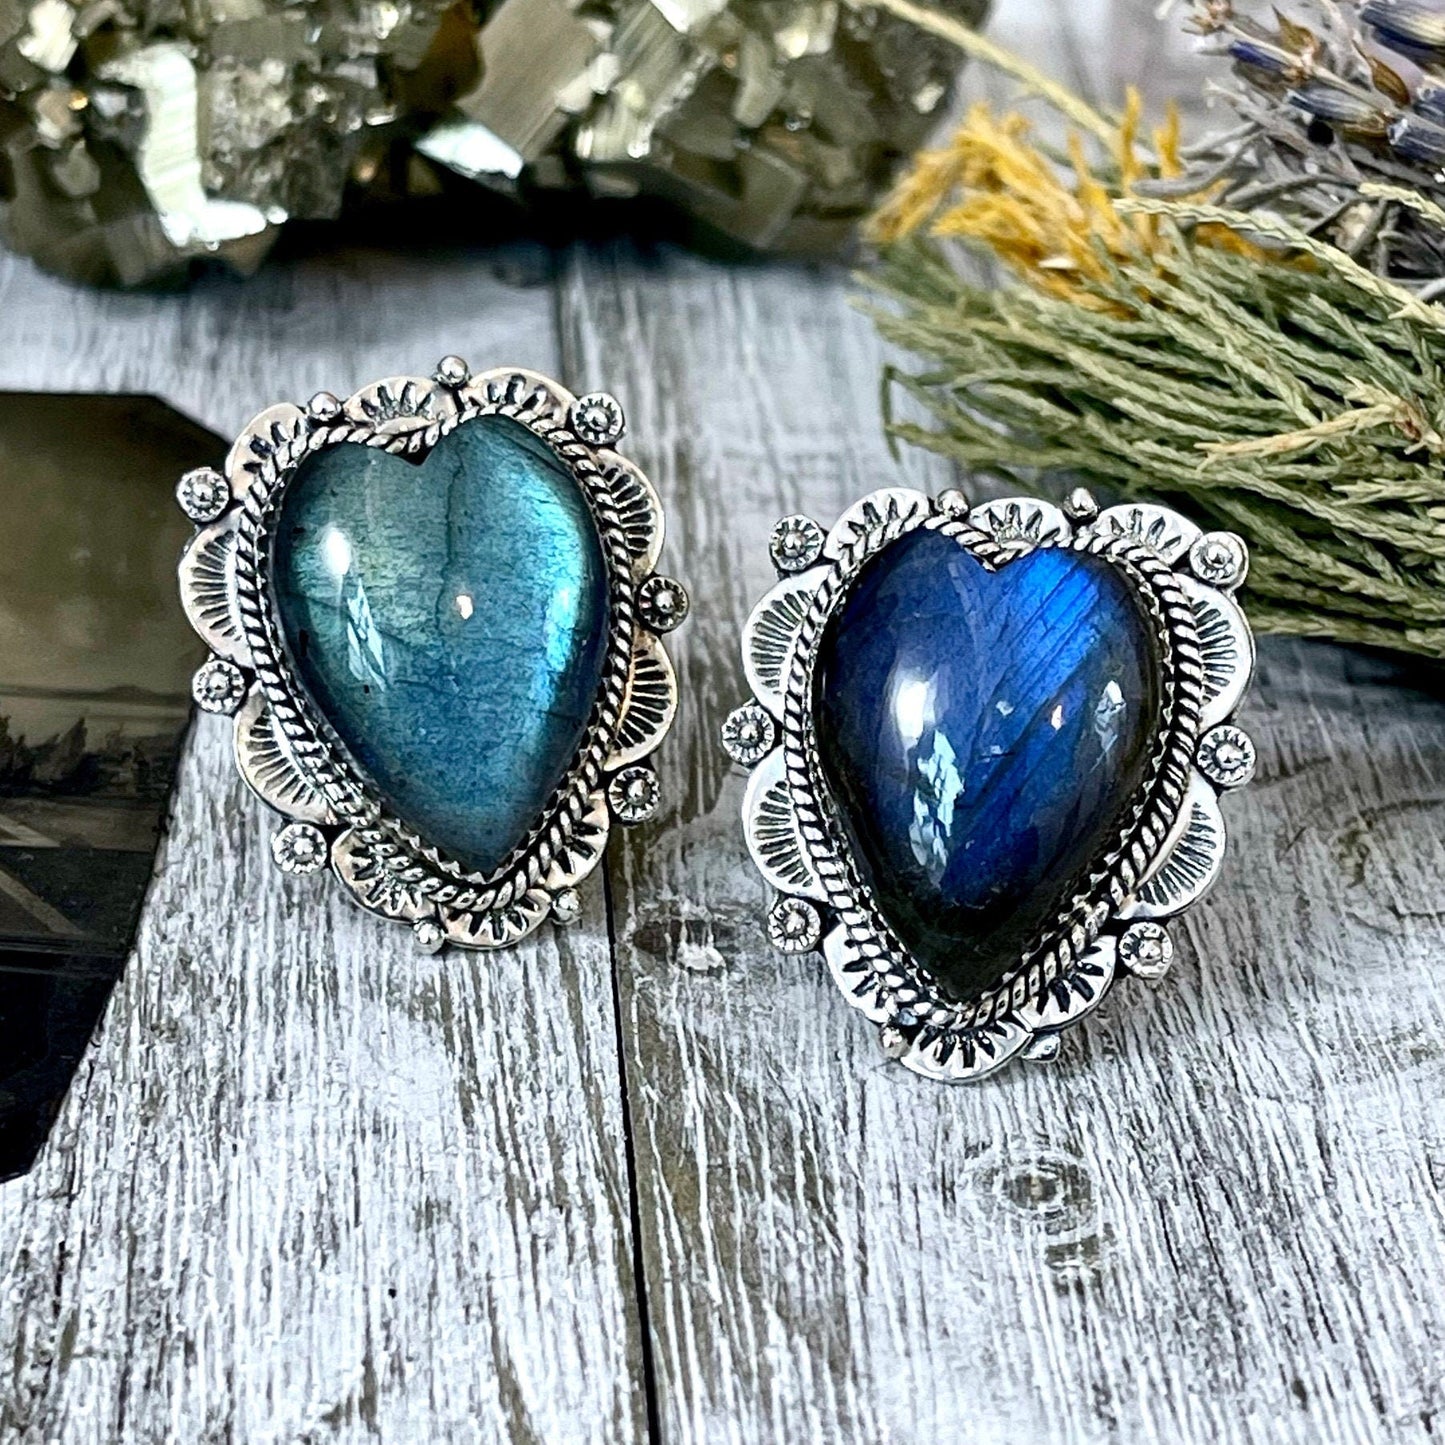 Labradorite Heart Crystal Statement Ring in Sterling Silver 925 - Adjustable - Designed by FOXLARK Collection Adjusts to Size 6,7,8,9, or 10